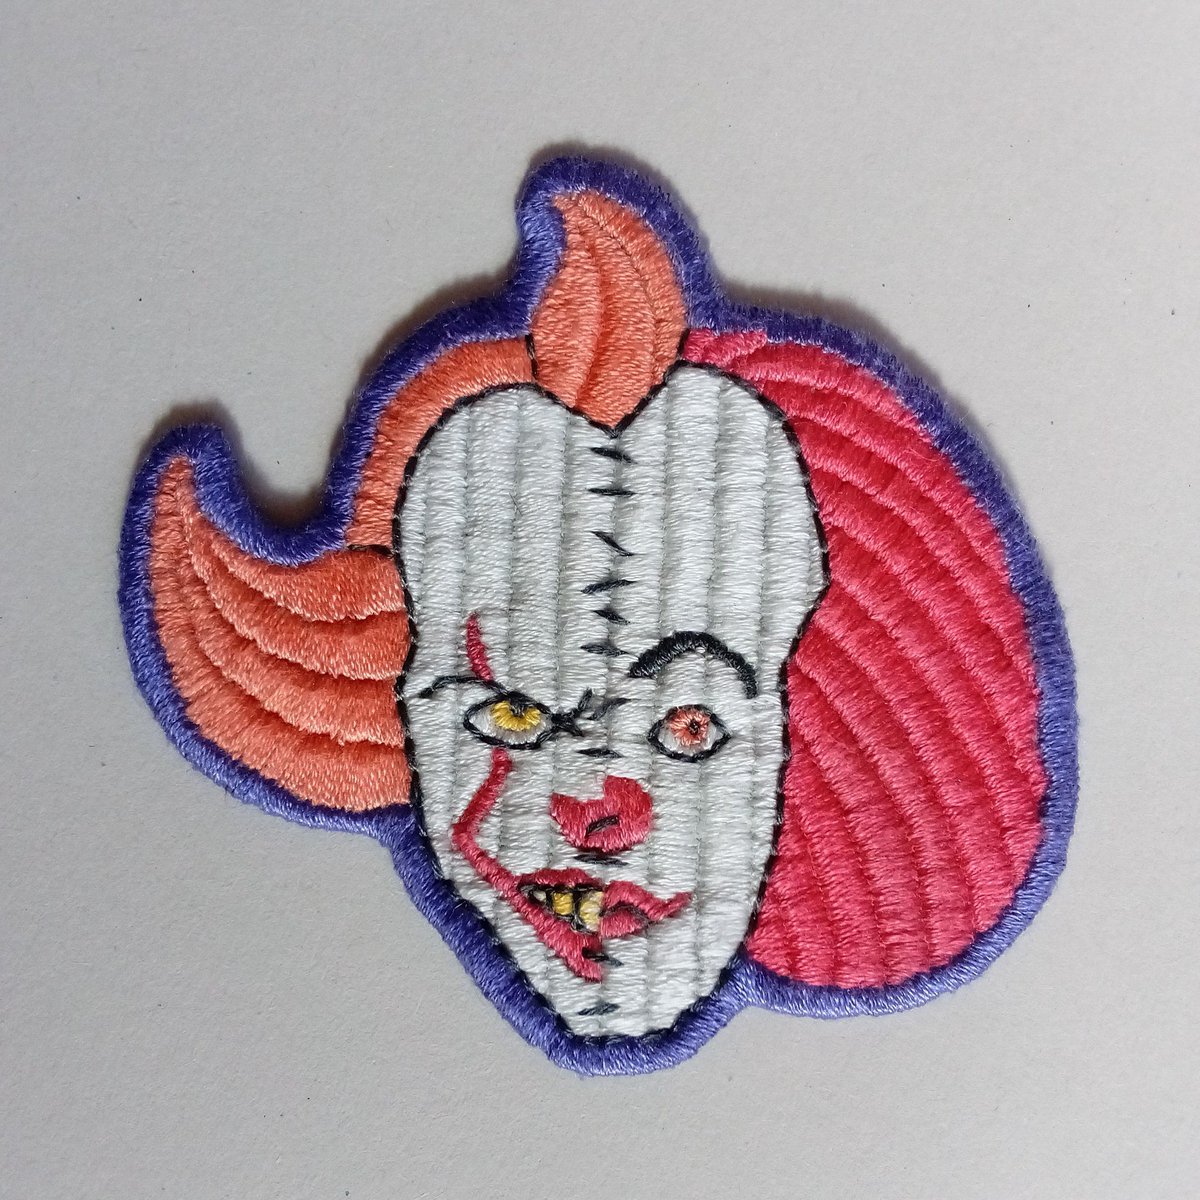 #Pennywise #sewonpatch - hand #embroidered
.
#art #artist #artwork #independentartist #patch #embroidery #embroideredpatch #craft #needlepoint #colourful #patchwork #crafty #patches #horror #horrorfanart #horrorfan #clown #clownpatch #it #pennywiseclown #itclown #badge #handmade